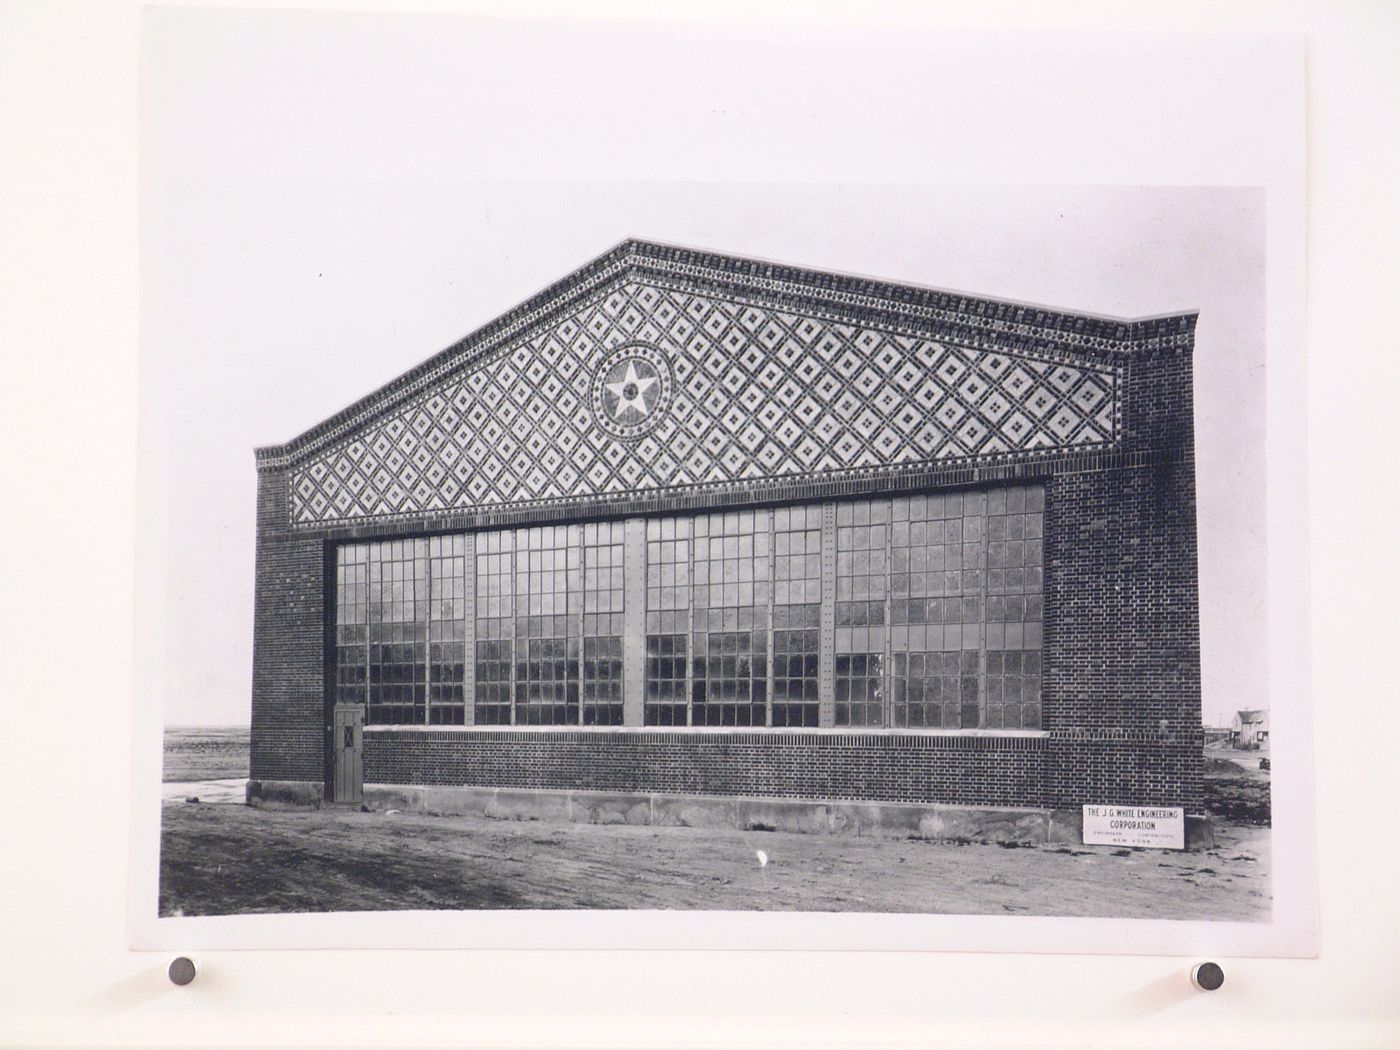 View of the lateral [?] façade of a Hangar, United States Aviation School, Langley Air Force Base, Langley, Virginia